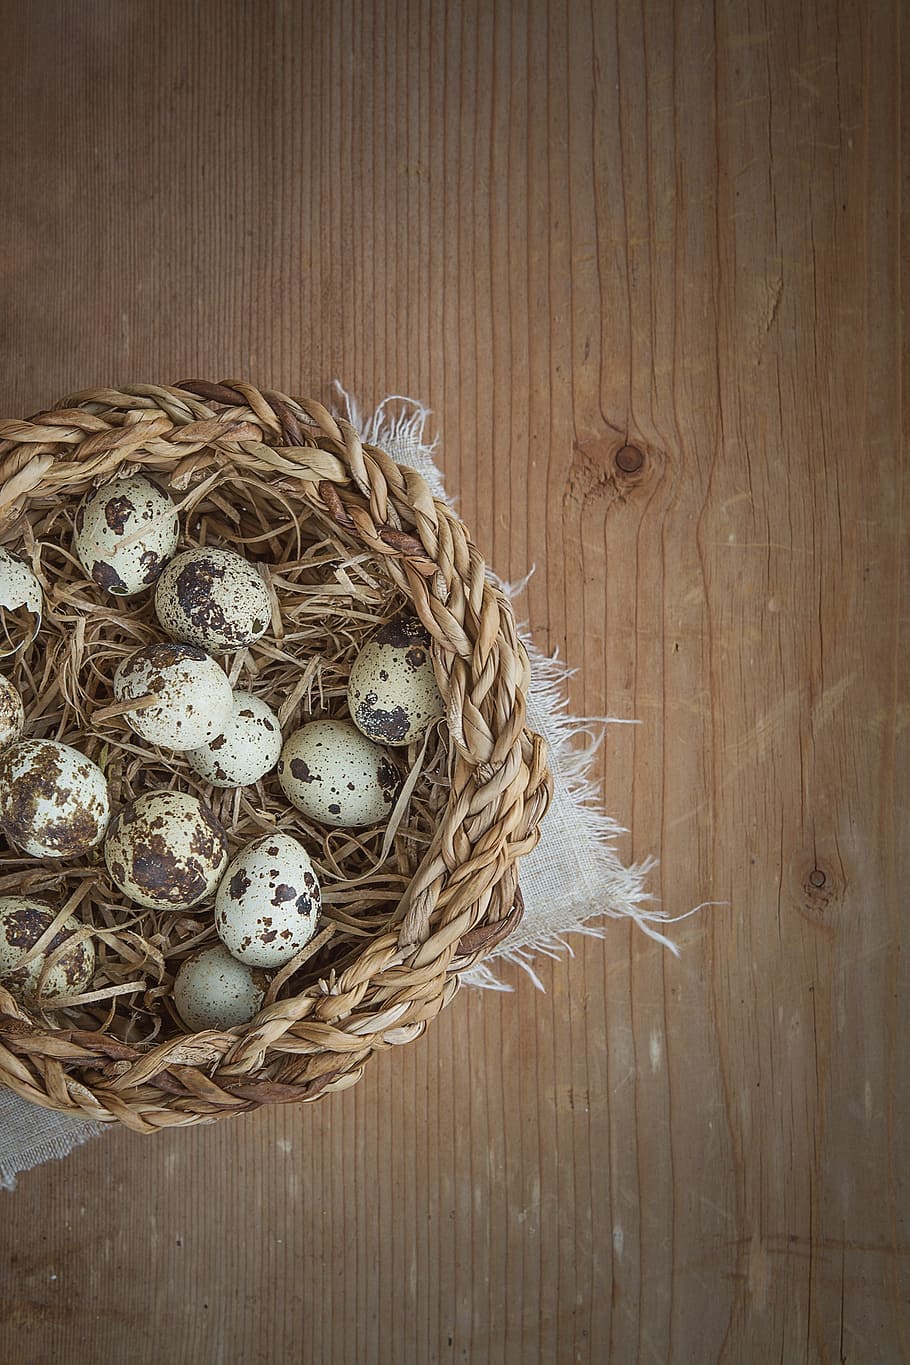 basket, egg, quail eggs, small, small eggs, natural product, close, wood, text dom, negative space